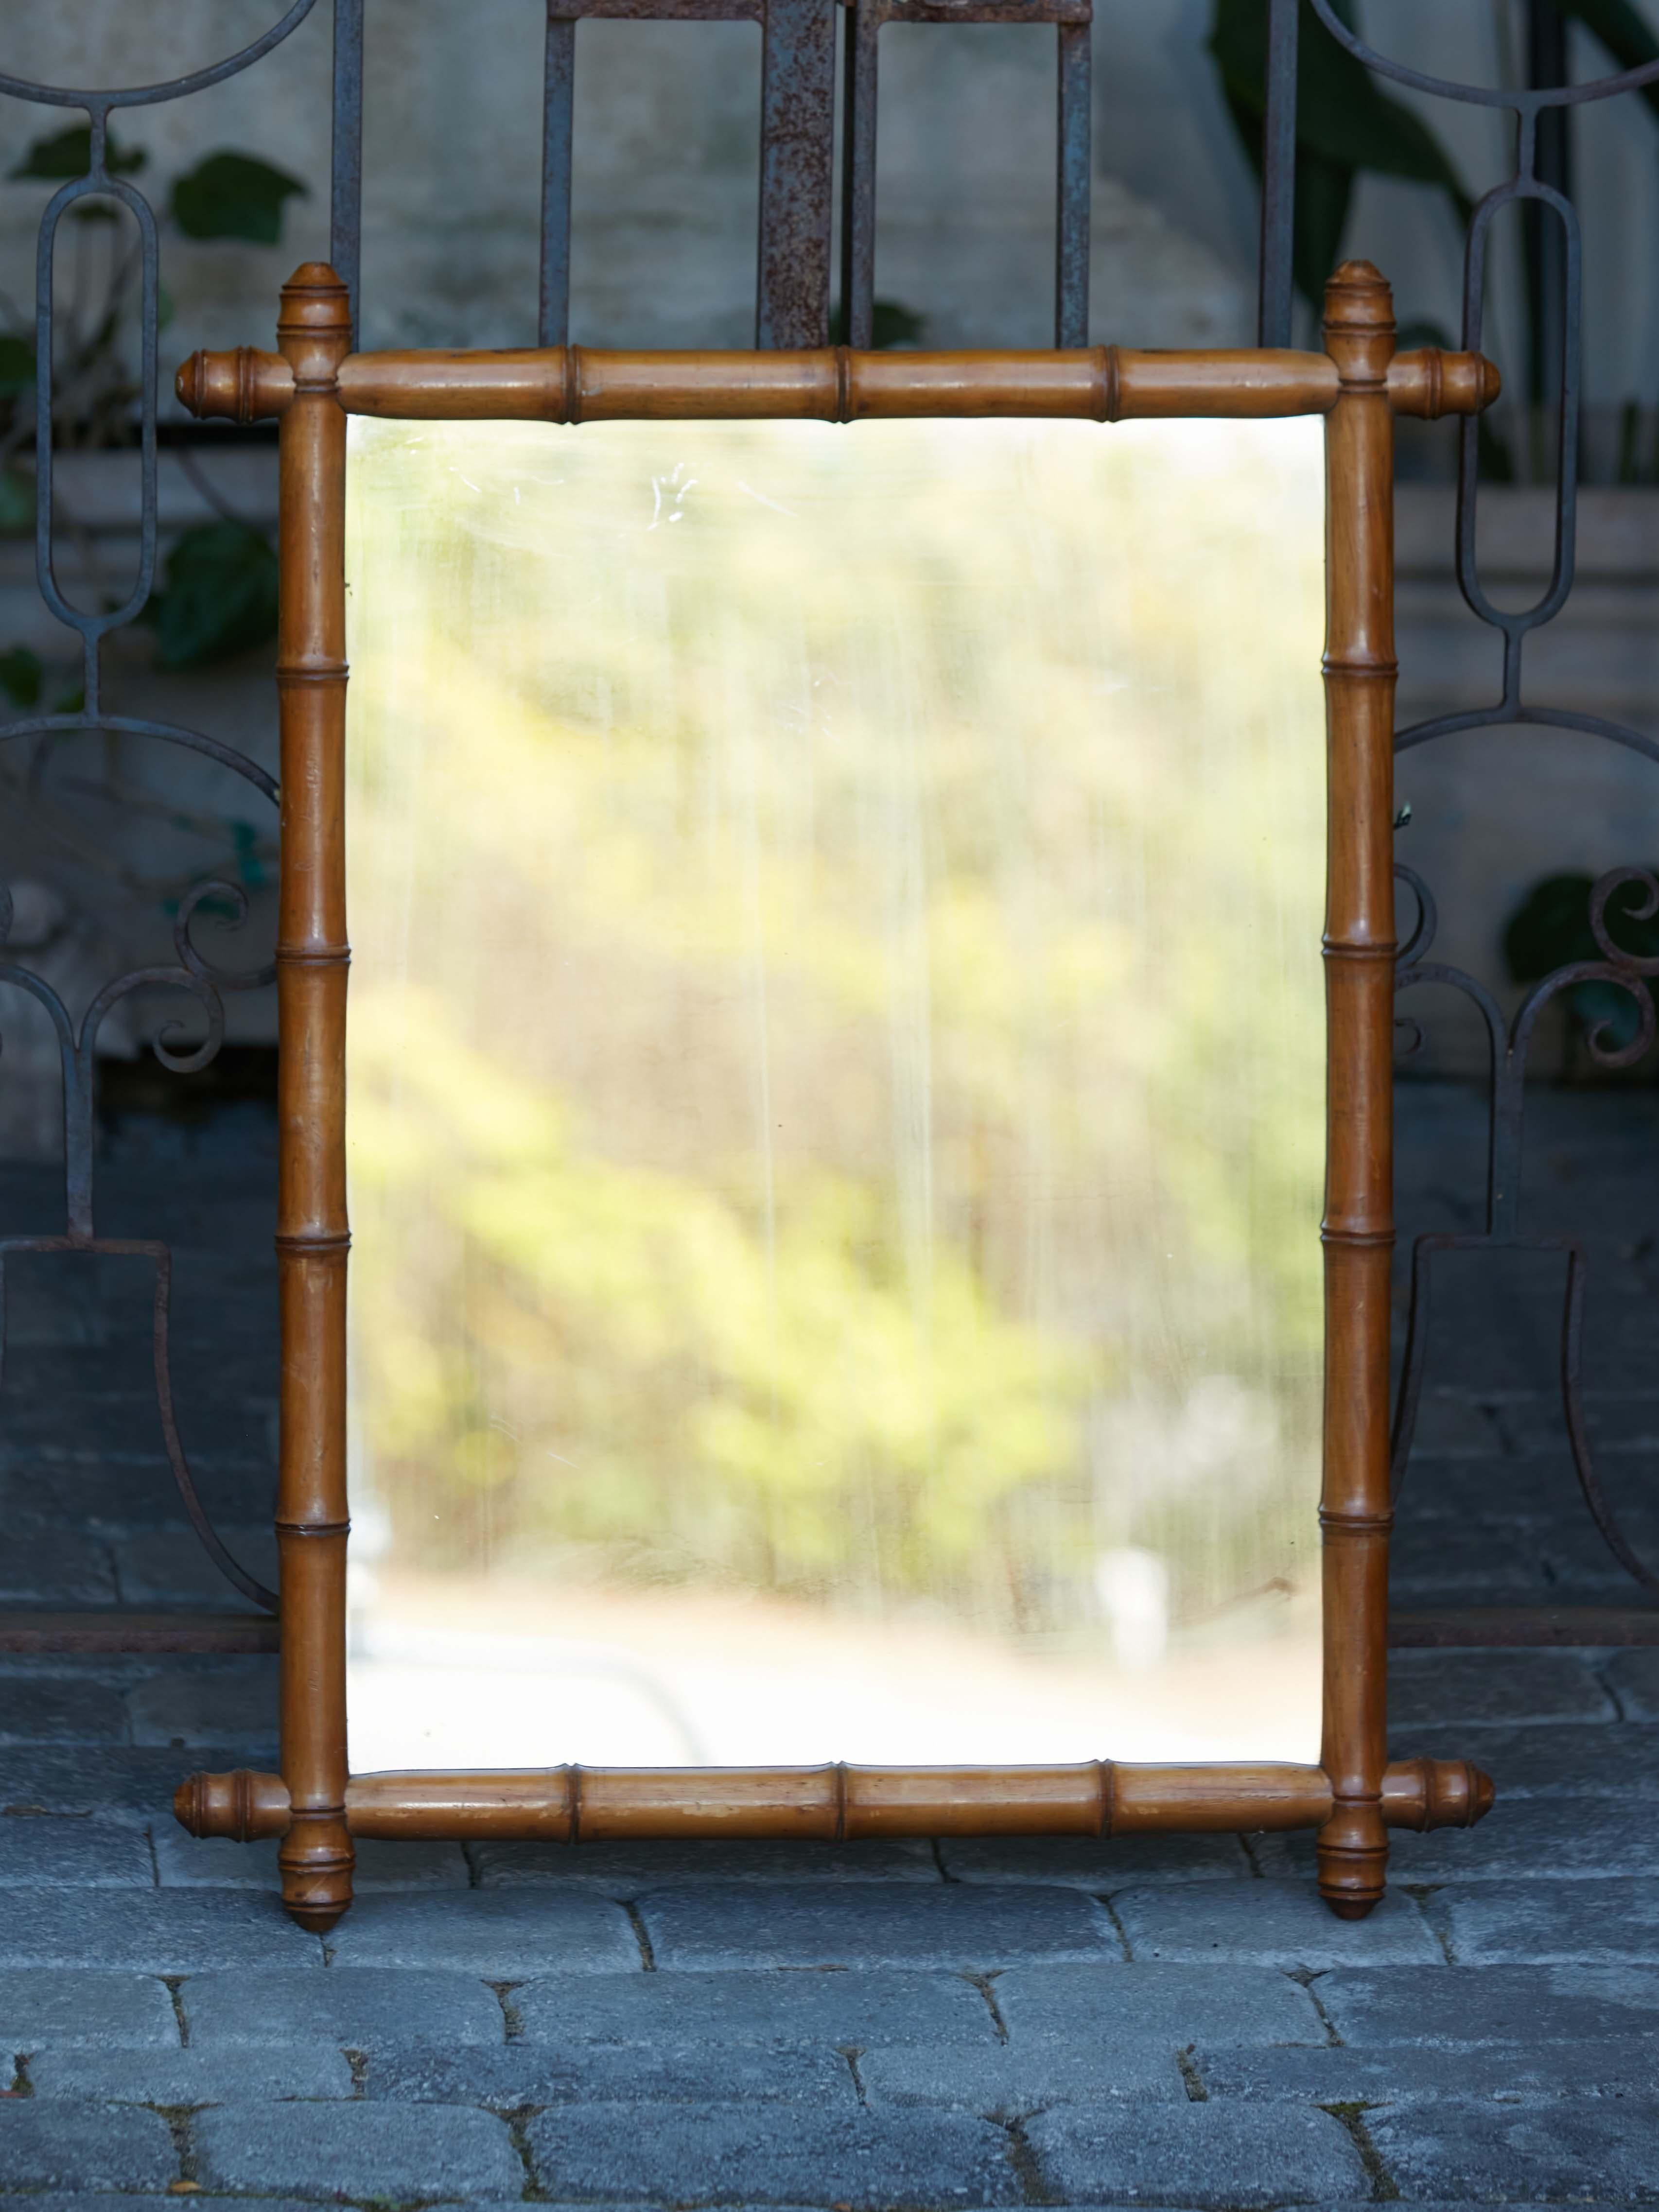 A rustic French faux-bamboo wooden mirror from the early 20th century, with brown patina and turned protruding corners. Transport yourself to the charm of the Roaring Twenties with this rustic French faux-bamboo wooden mirror from the early 20th